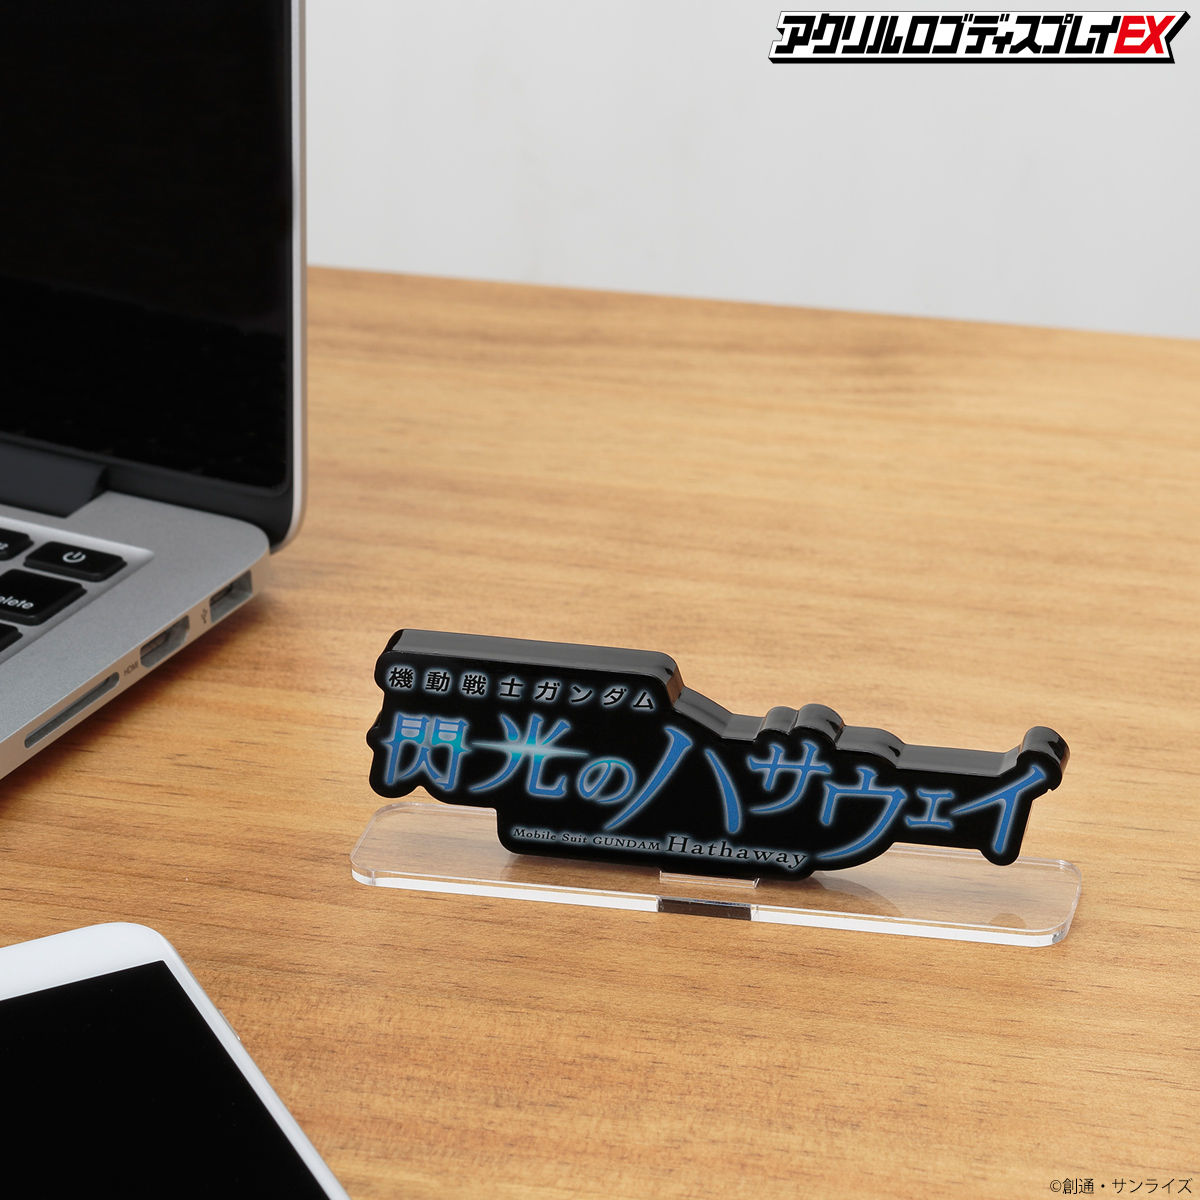 [PREORDER] Big Size of Acrylic Logo Display EX Mobile Suit Gundam Hathaway in Black Background